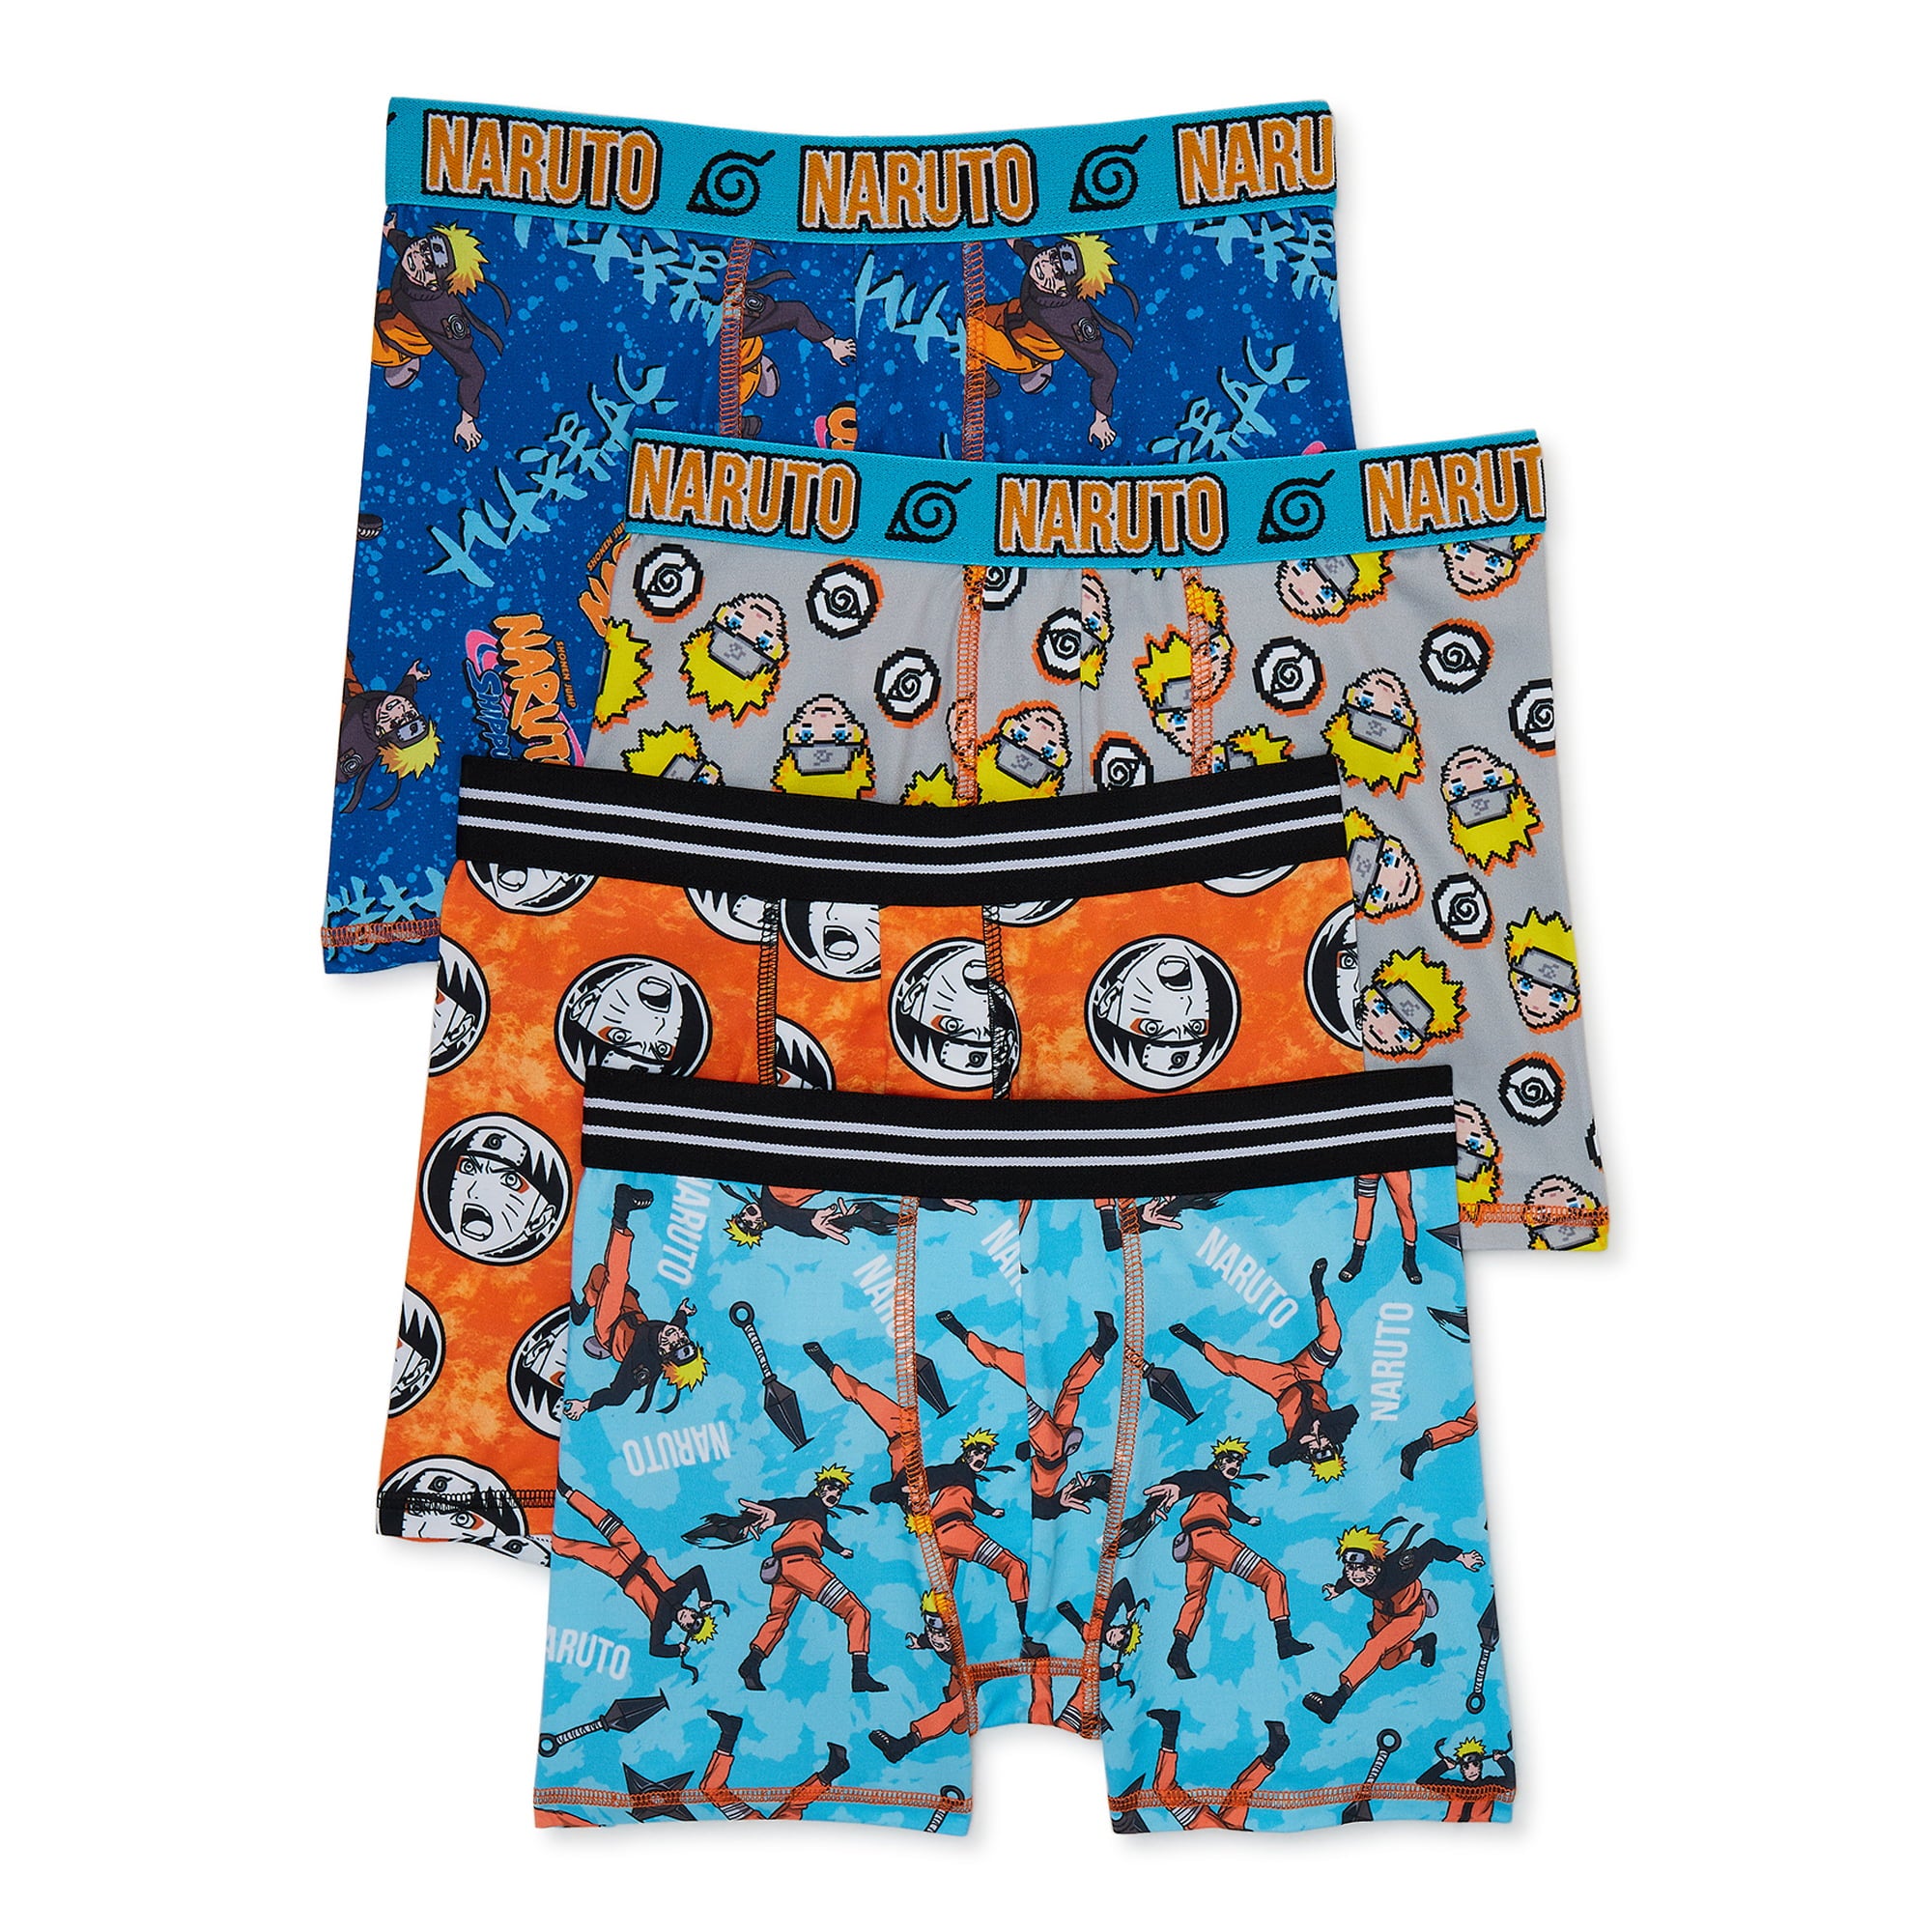 Naruto Boys Boxer Brief Underwear, 4-Pack, Sizes 4-10 – Rex Distributor,  Inc. Wholesale Licensed Products and T-shirts, Sporting goods